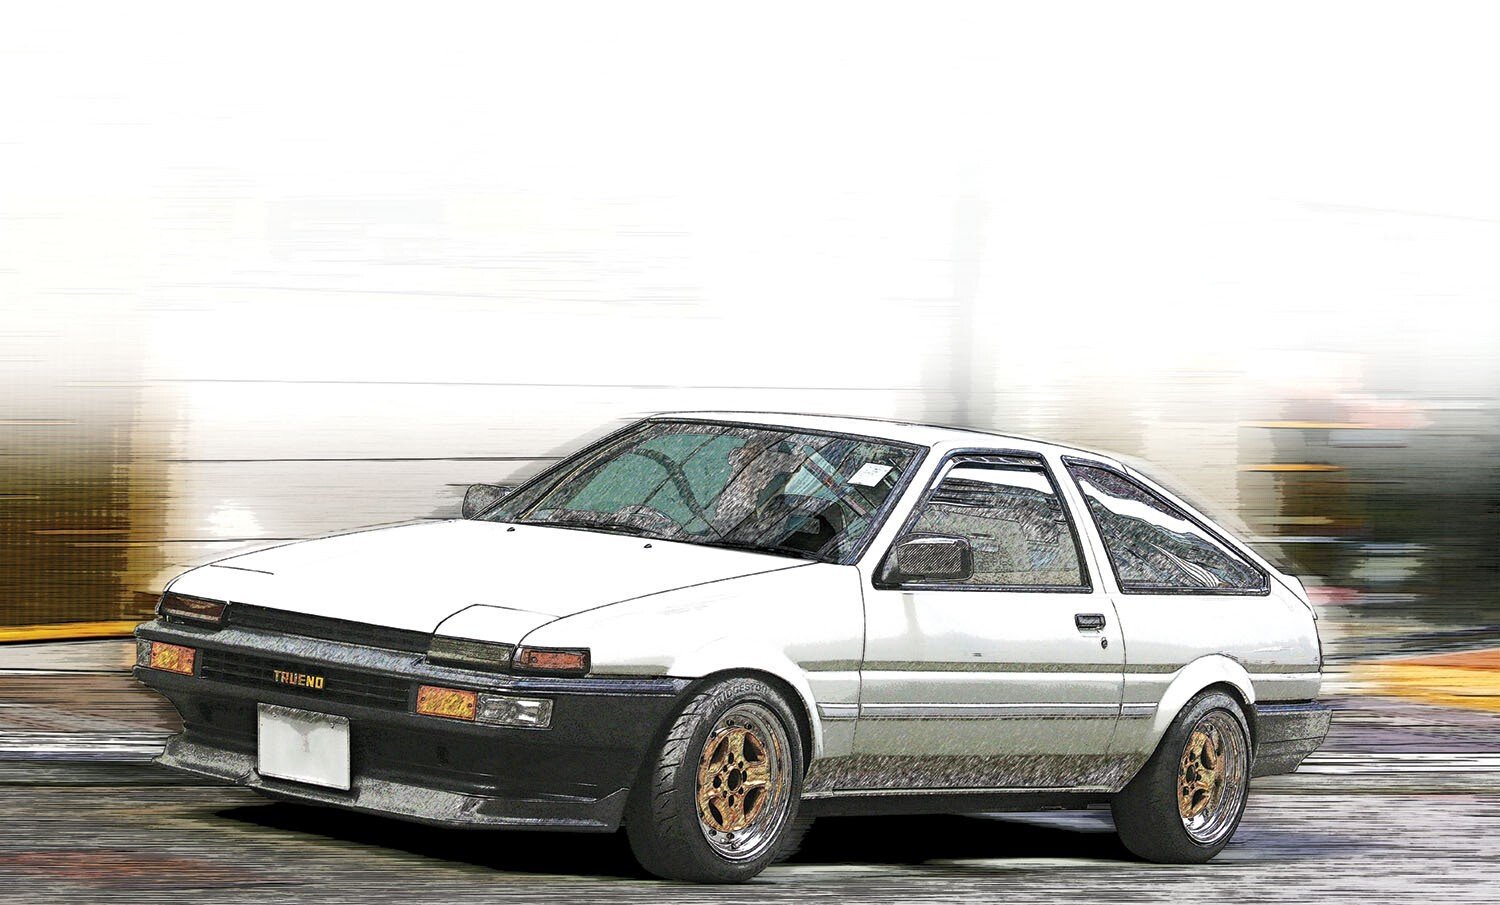 Toyota AE86: You Know The Name But Do You Know The Car? - YouTube